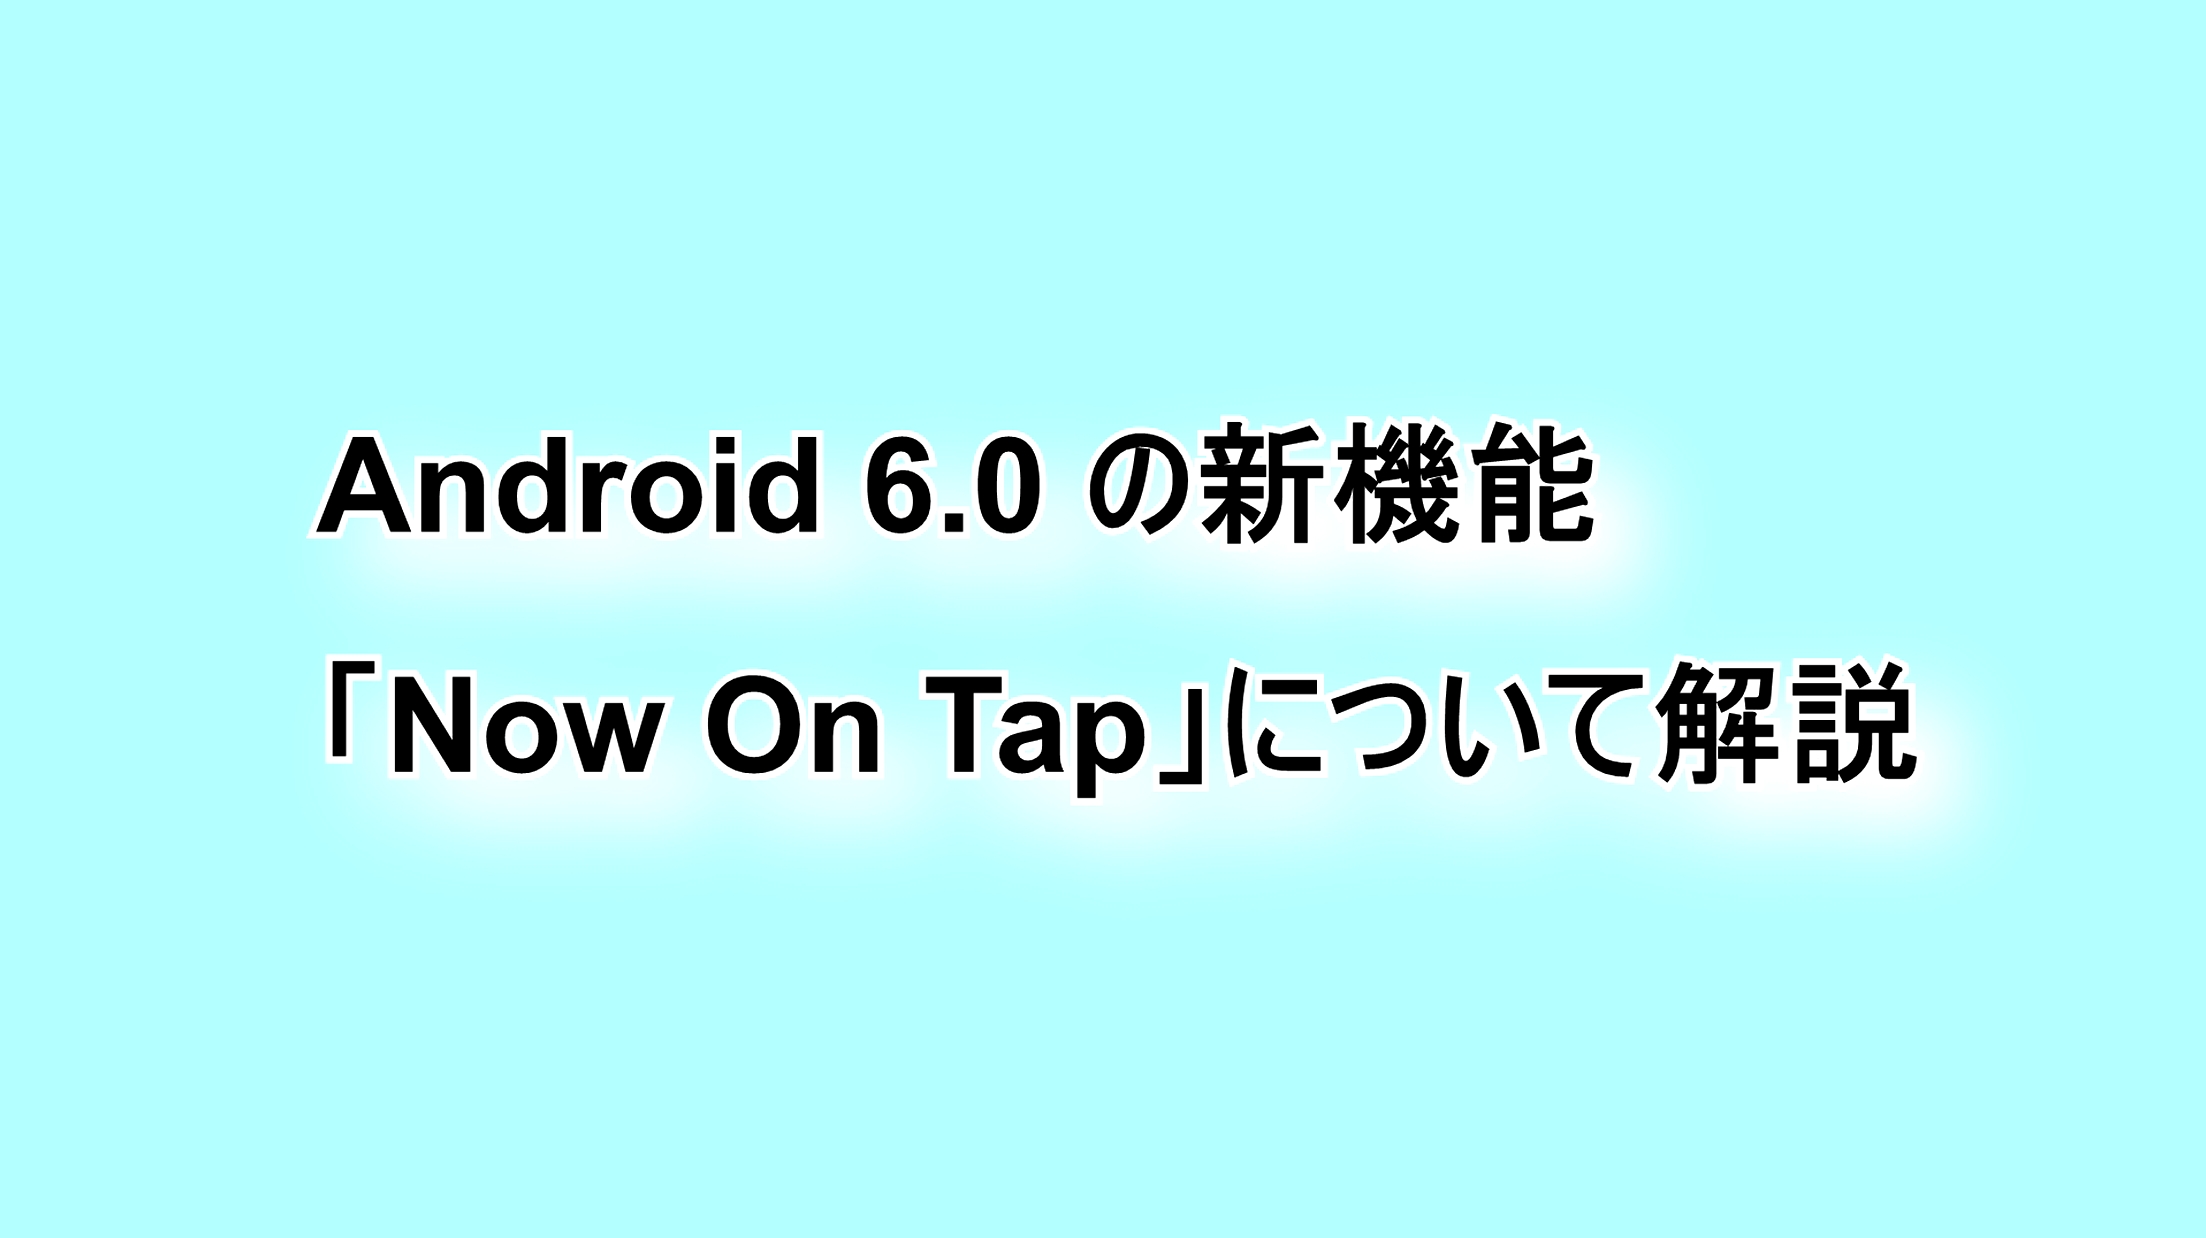 Android 6.0の新機能「Now On Tap」について解説